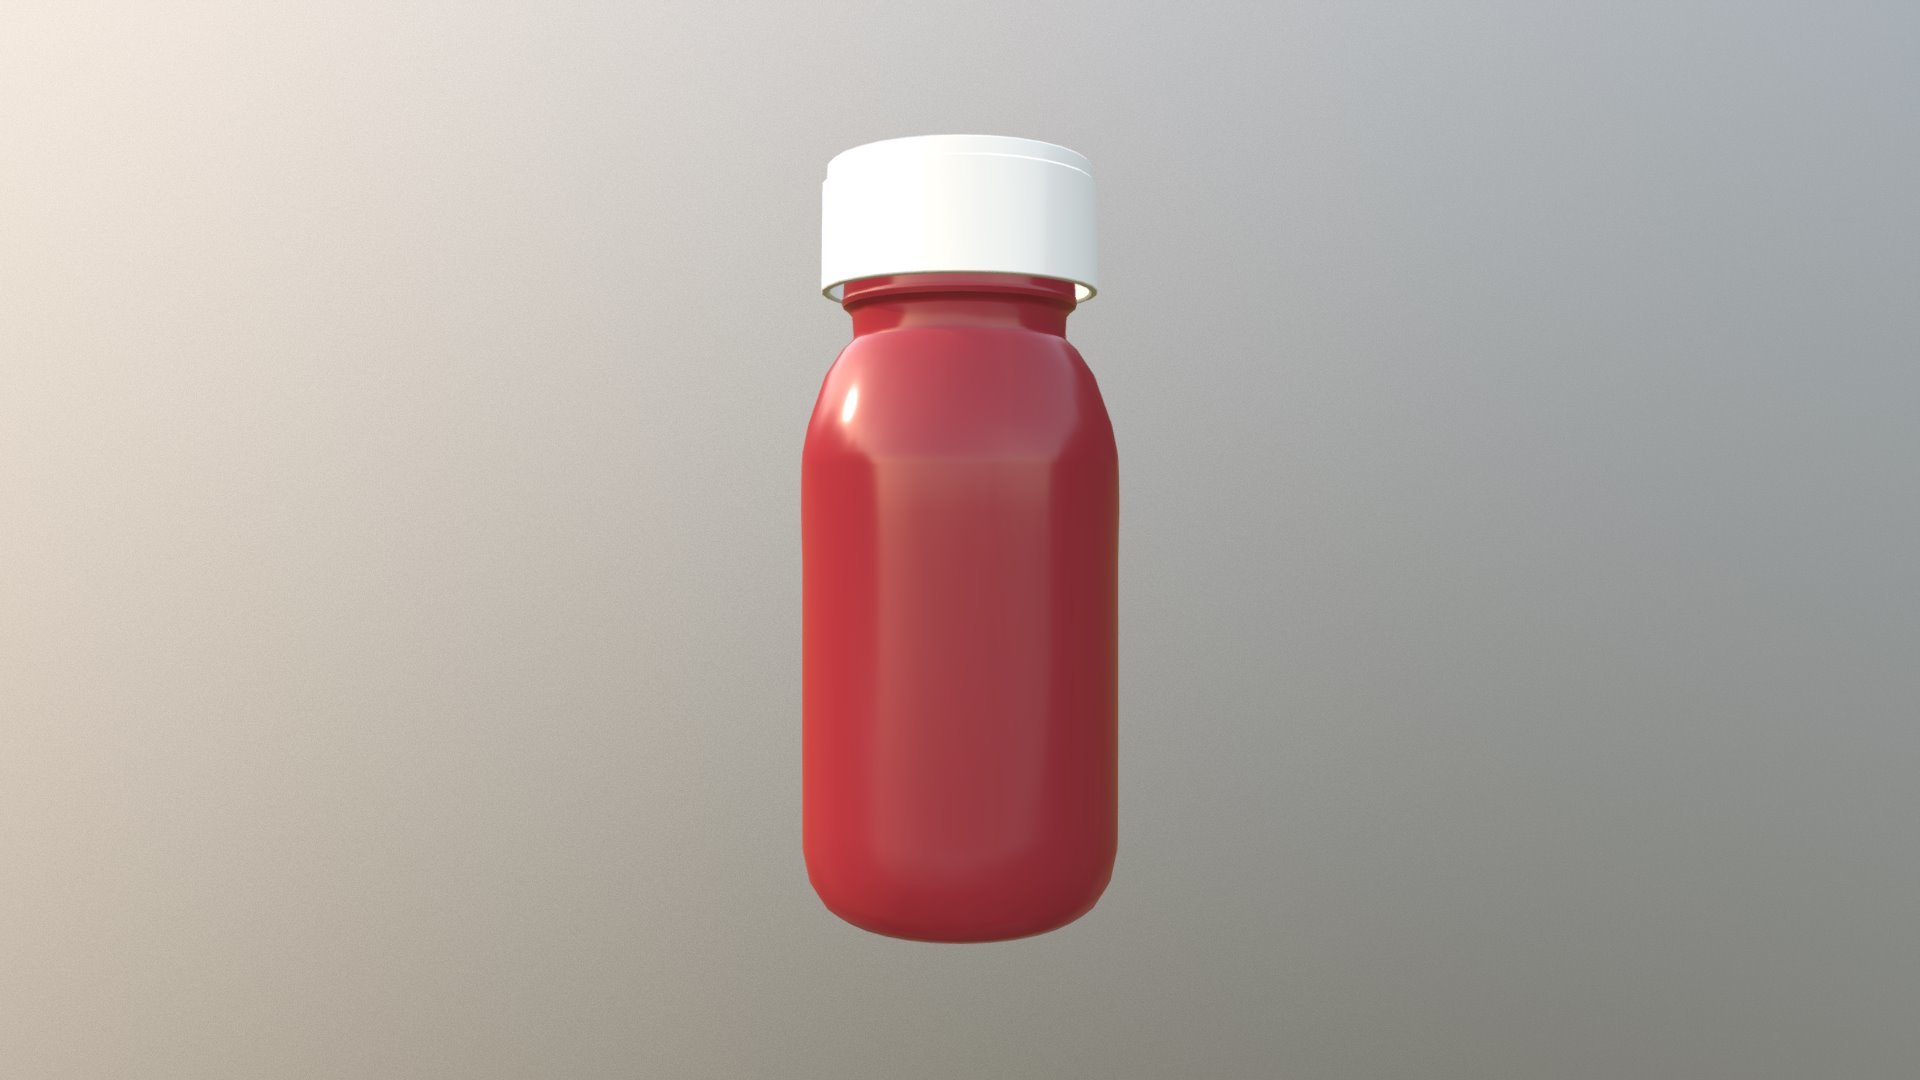 I was part of a project where we were staging the site of a car crash and the Paramedics afterwards. This is one of the assets I made for that project.
Modelled in Maya 2018 - Basic Medicine Bottle v1 - Download Free 3D model by elouisetrewartha (@etrewartha) 3d model